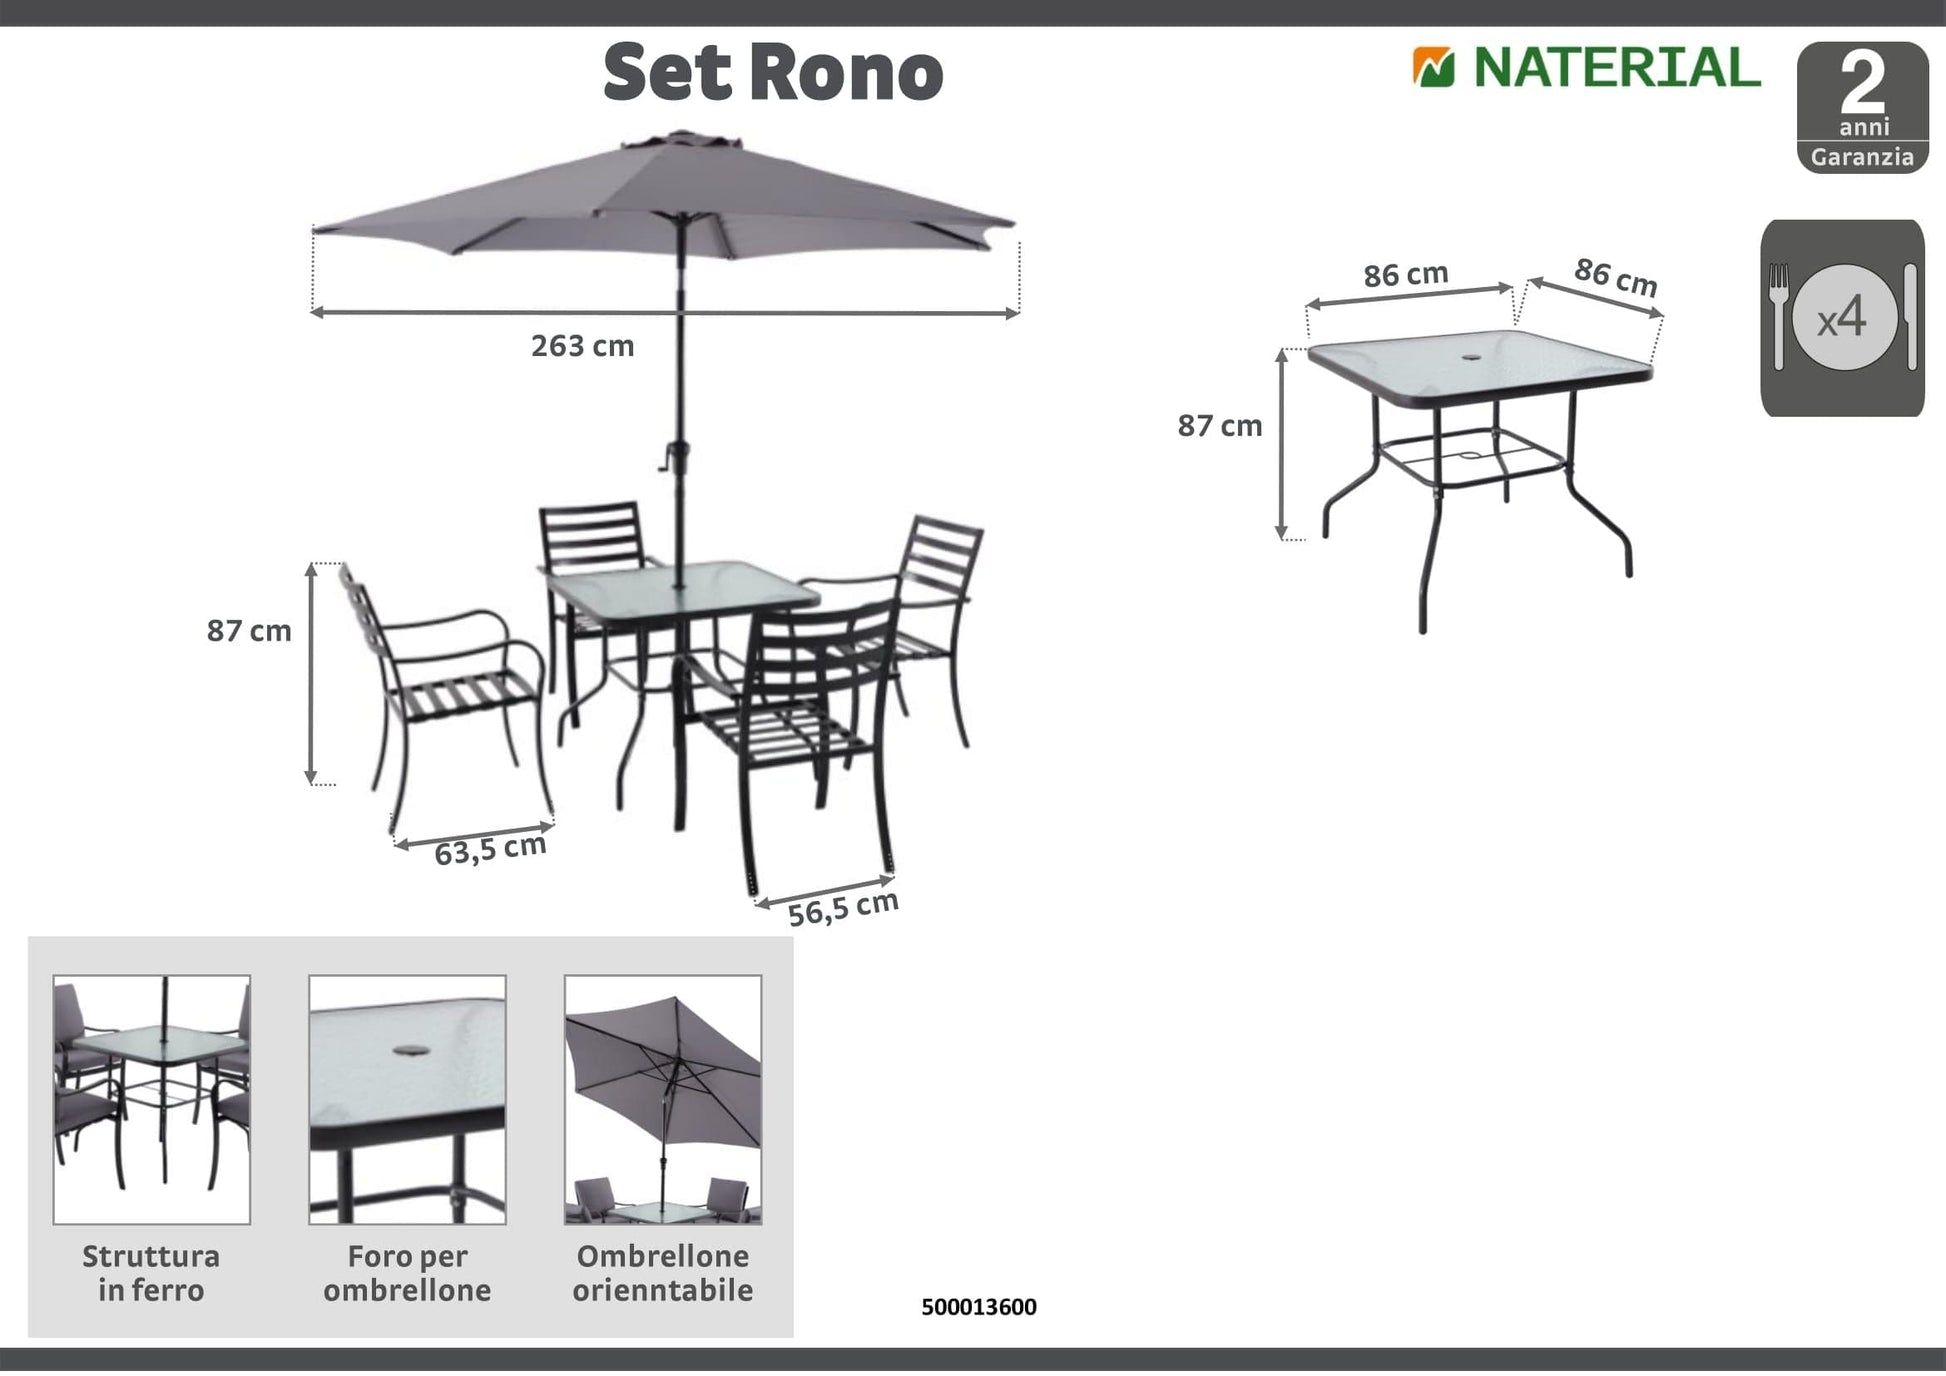 RONO NATERIAL SET 4 chairs, 1 table and umbrella in anthracite steel - best price from Maltashopper.com BR500013600